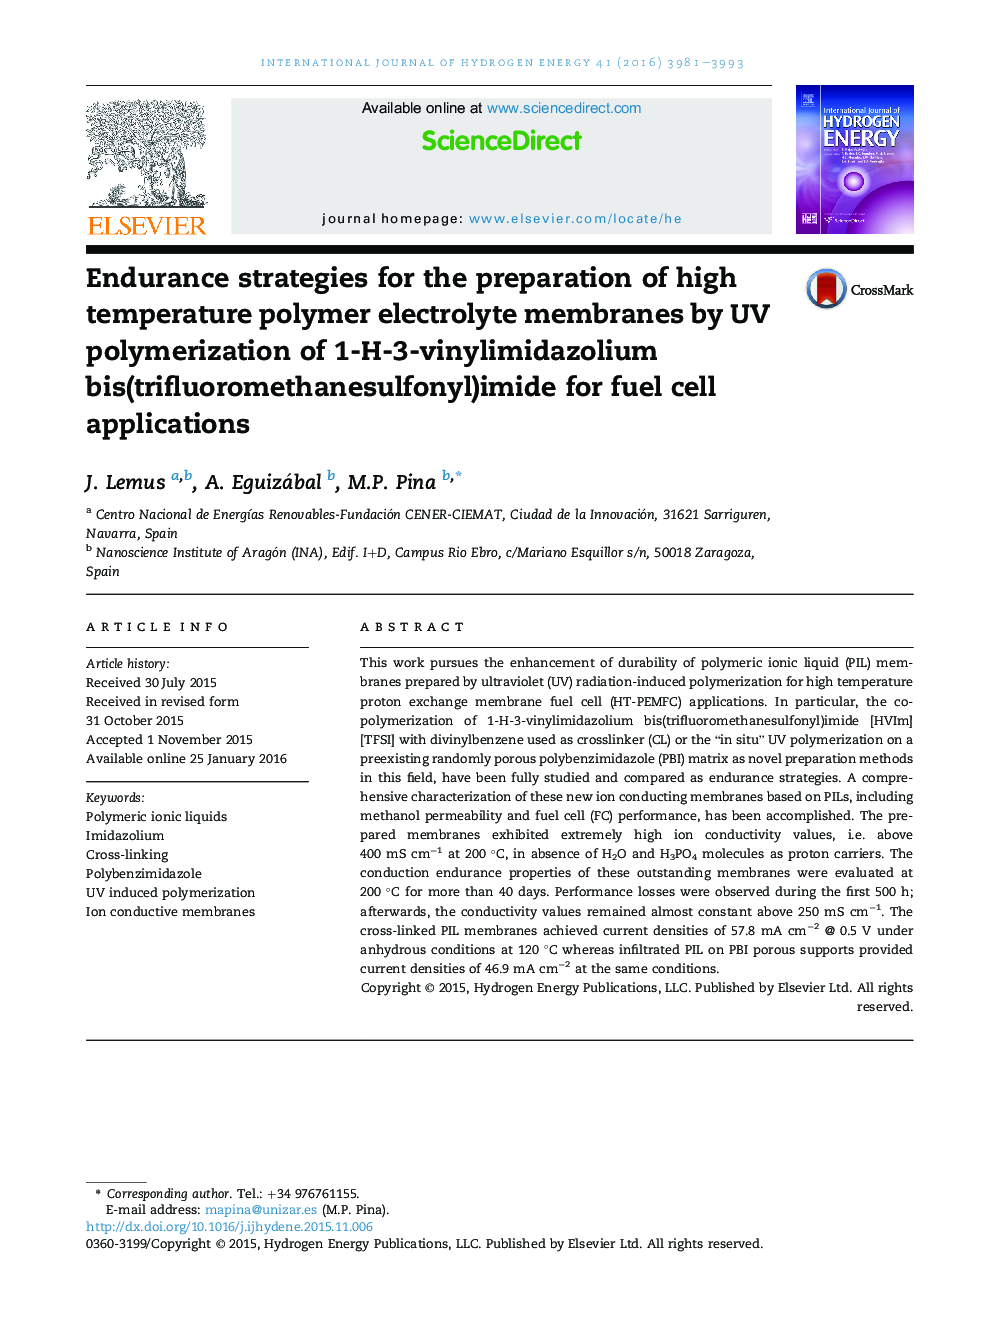 Endurance strategies for the preparation of high temperature polymer electrolyte membranes by UV polymerization of 1-H-3-vinylimidazolium bis(trifluoromethanesulfonyl)imide for fuel cell applications